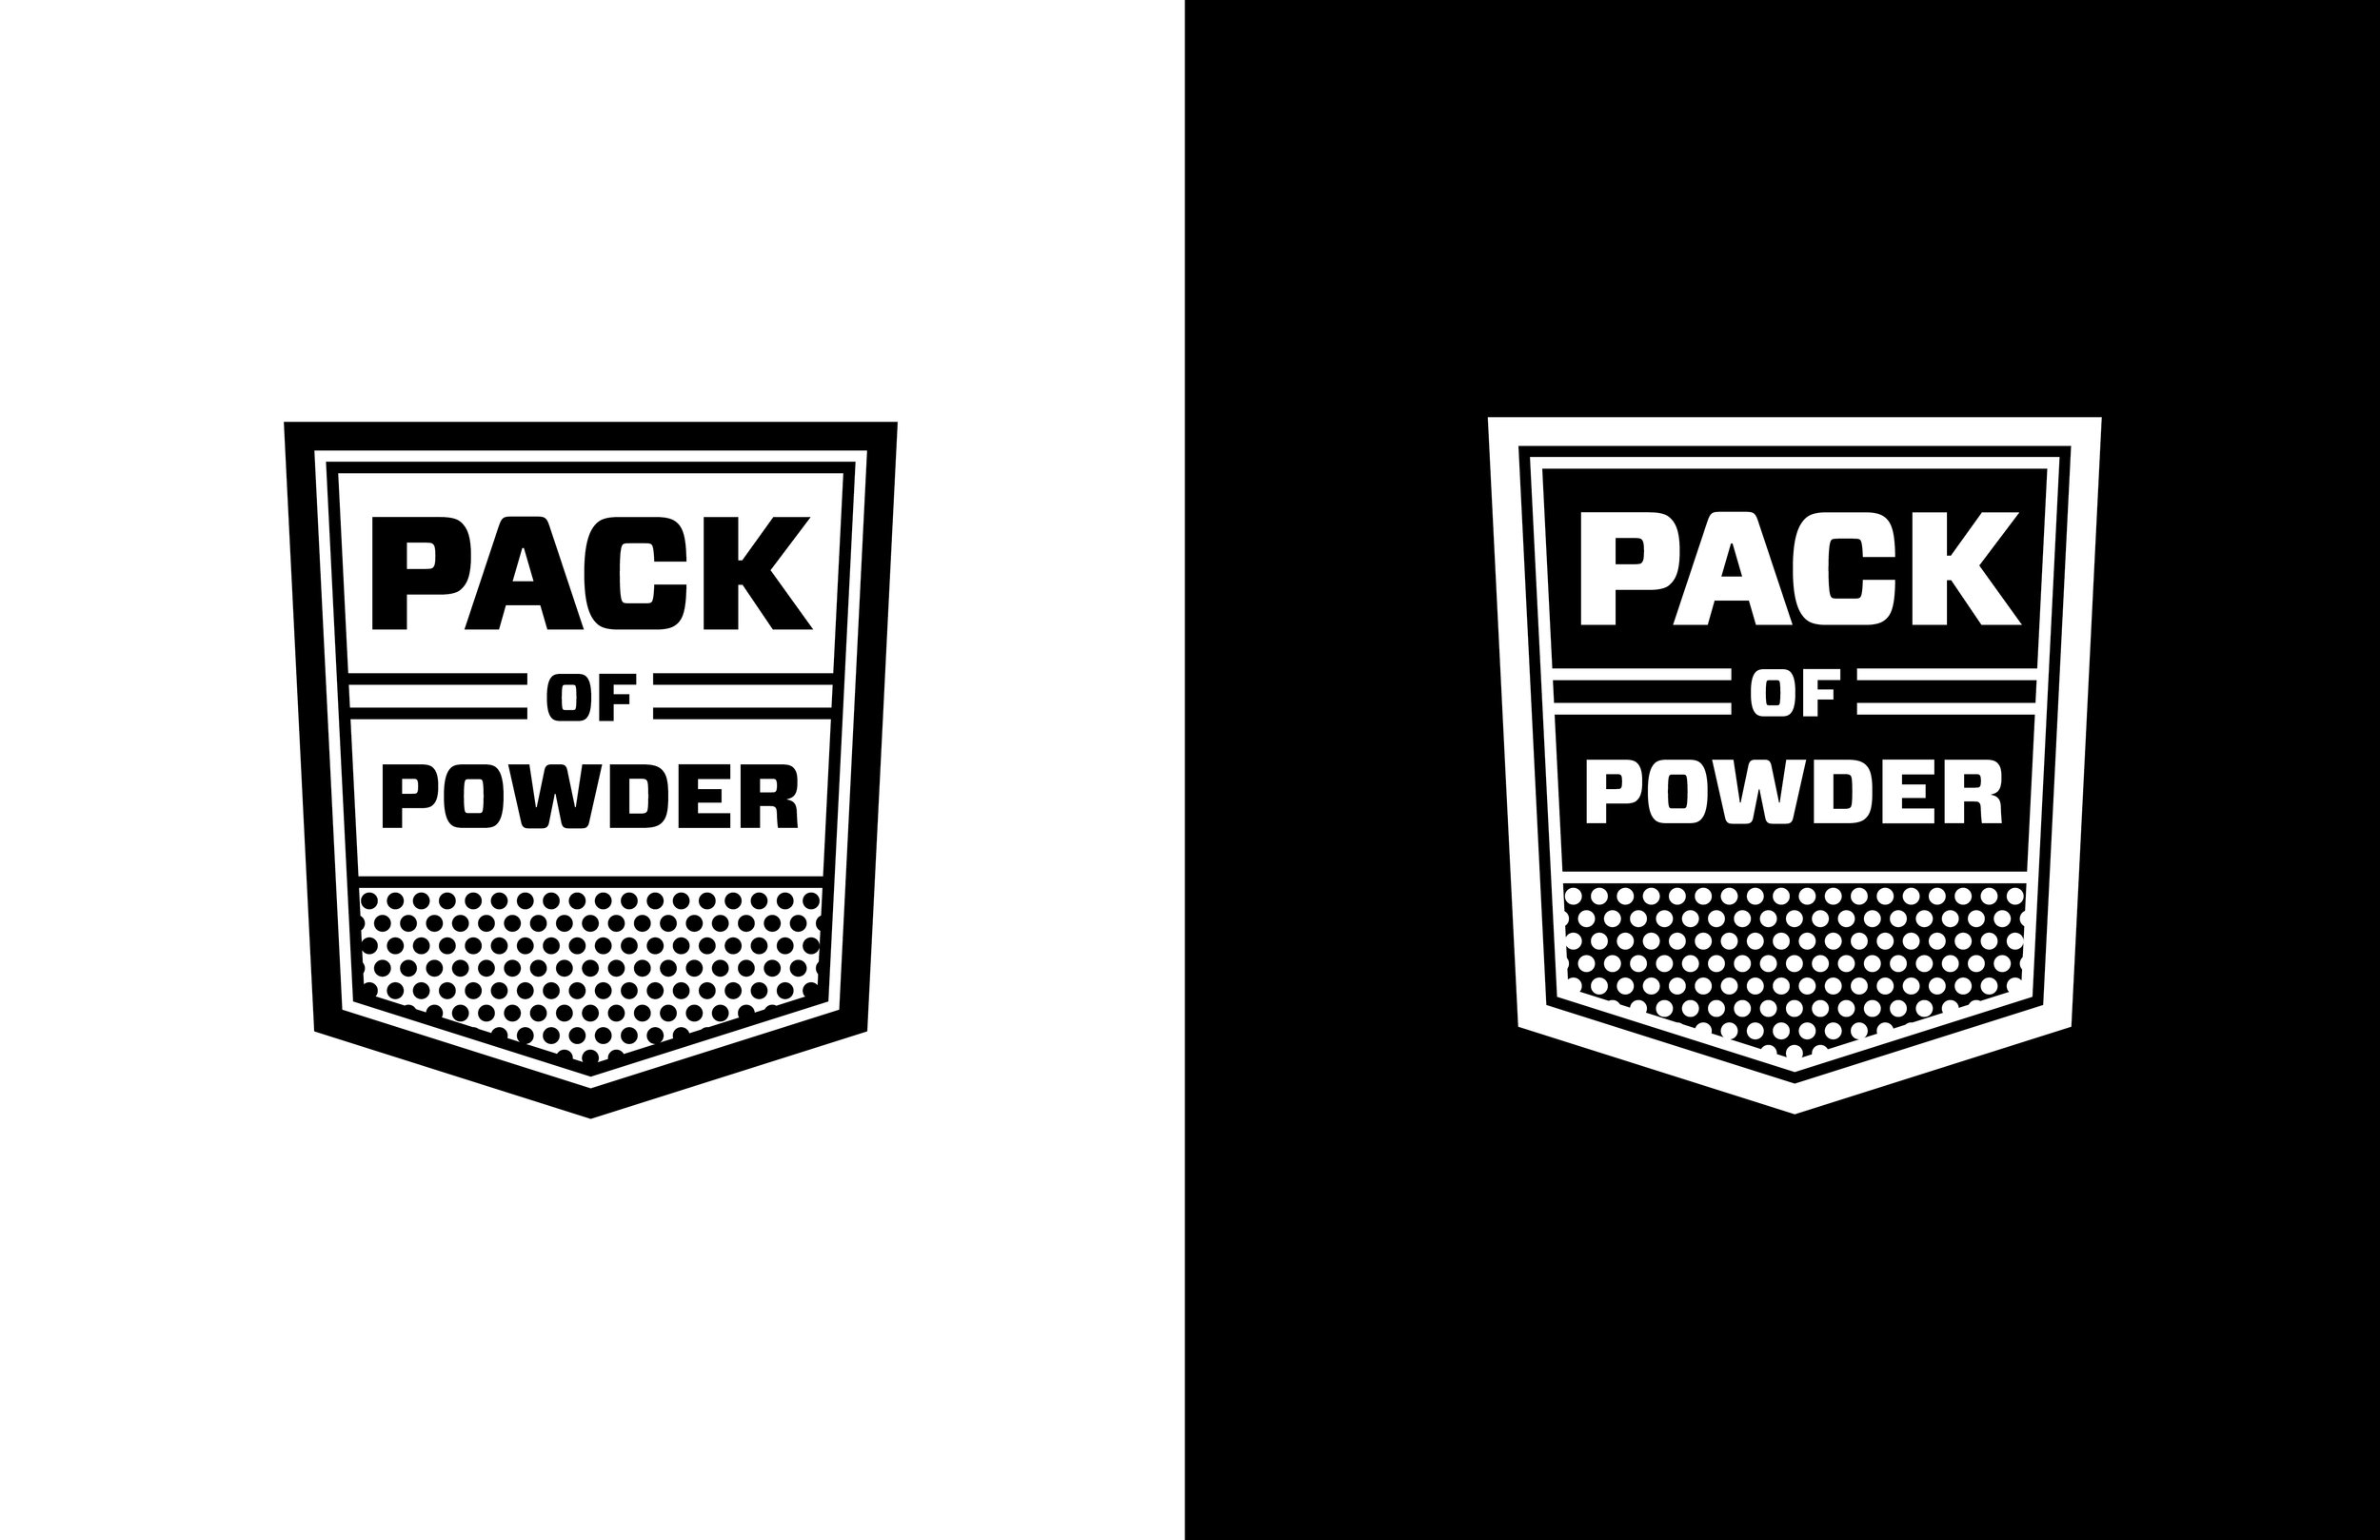 Pack of Powder (Copy)